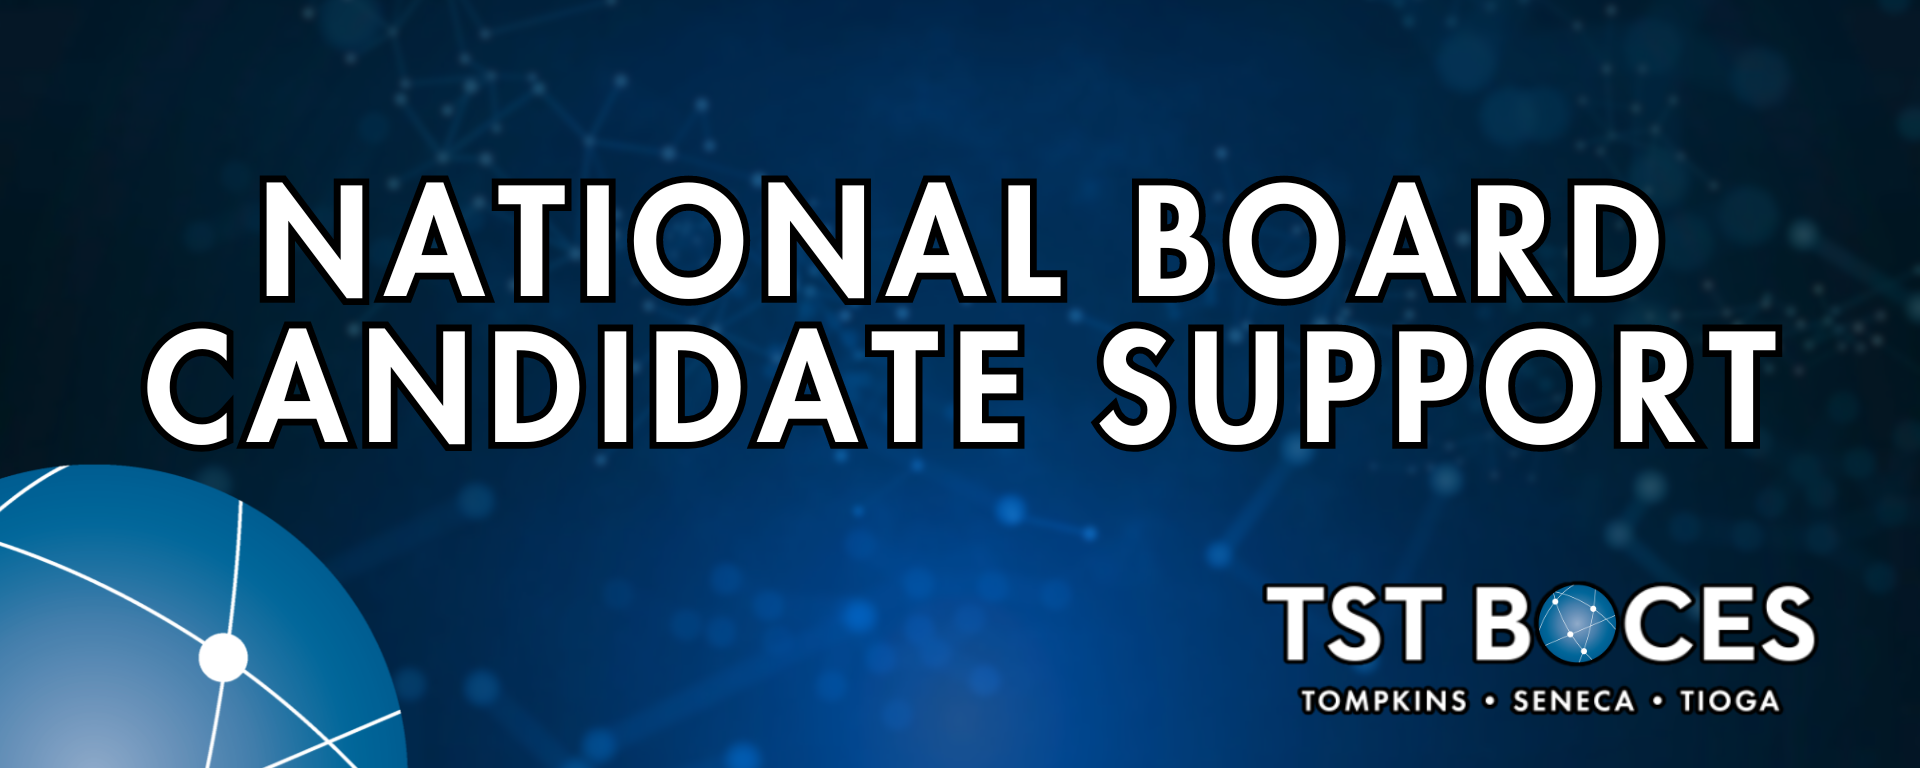 National Board Candidate Support banner